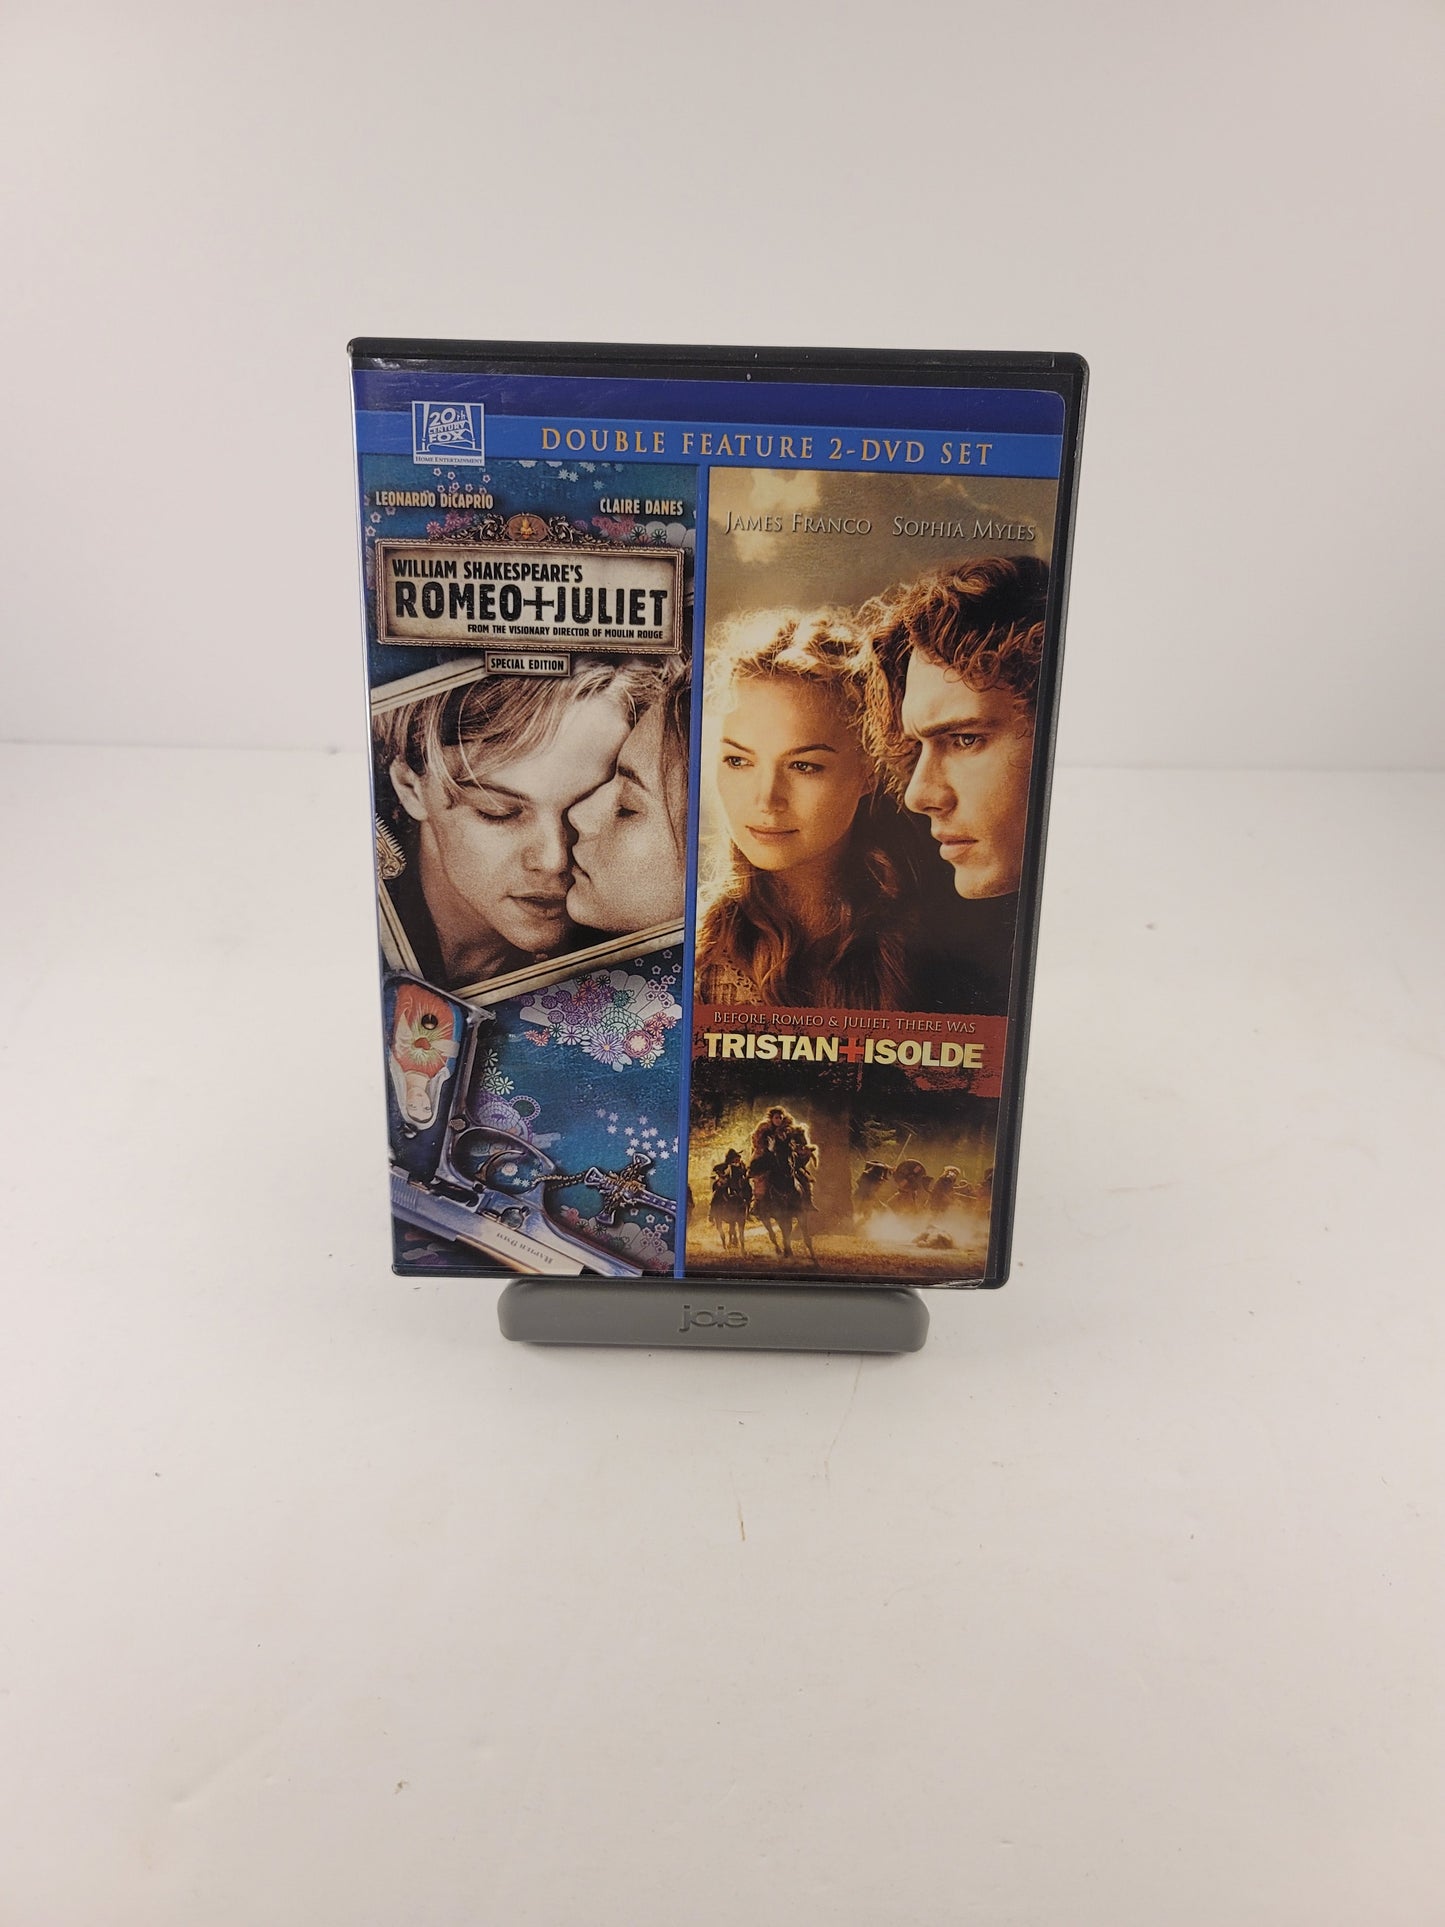 Romeo + Juliet and Tristan + Isolde Double Feature 2 DVD Set - DVD